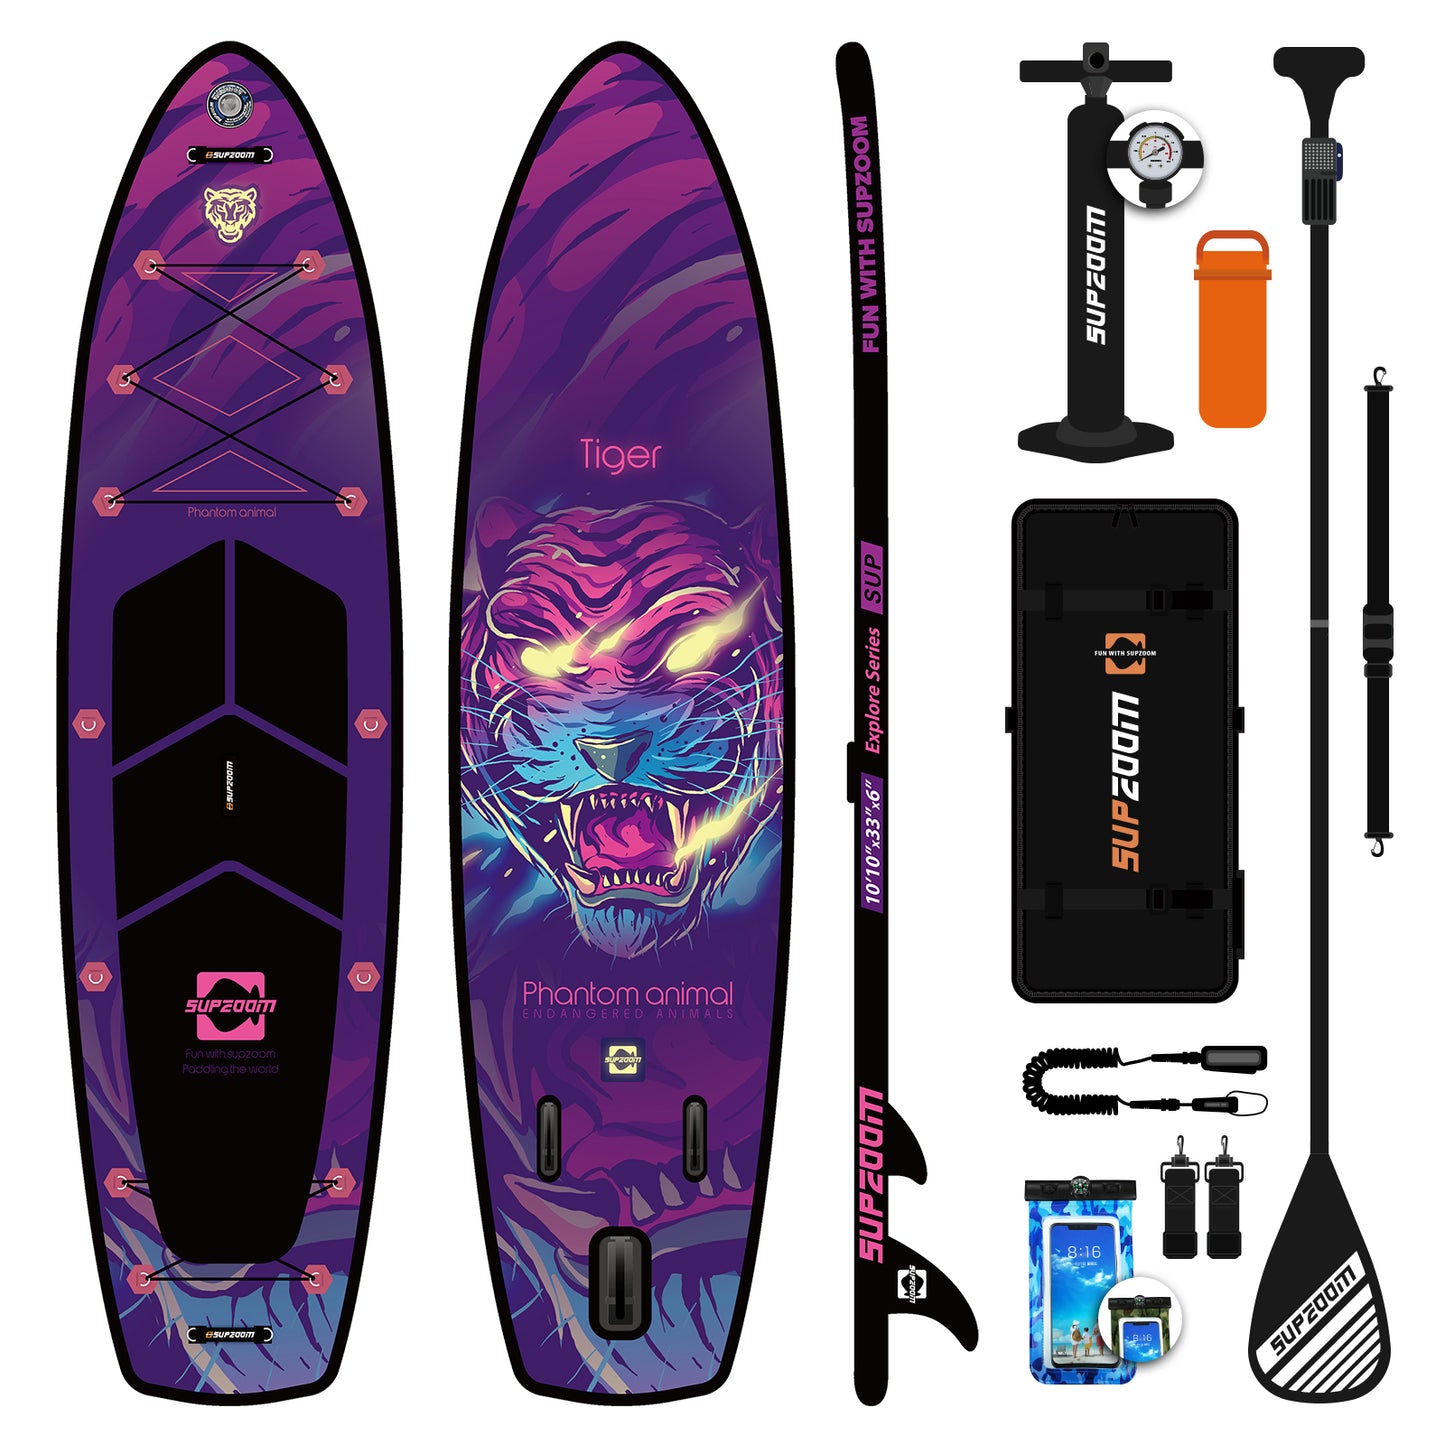 SUPZOOM double layer mighty tiger design 10'10" all round Inflatable Paddle Board